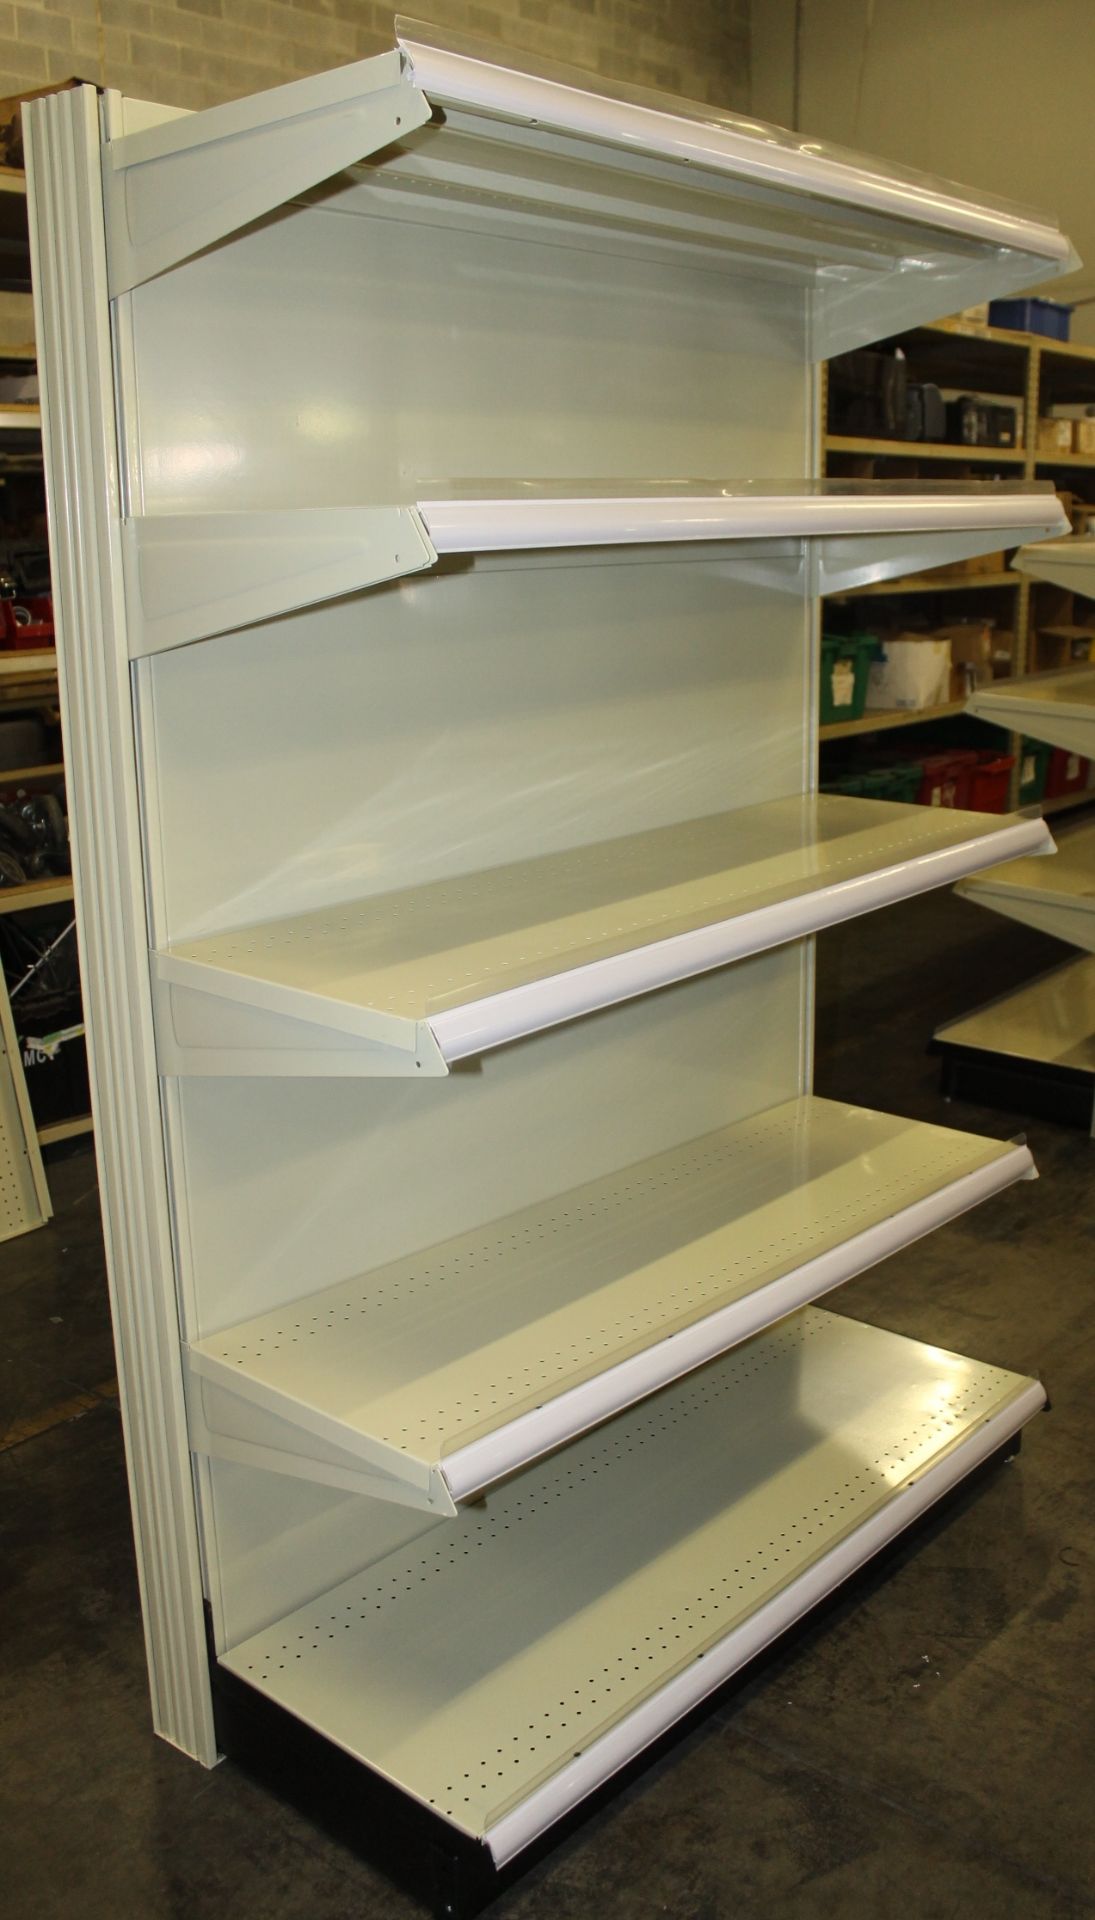 5 SECTIONS OF GONDOLA SHELVING WITH 4 SHELVES LEVEL DOUBLE SIDED - Image 2 of 2